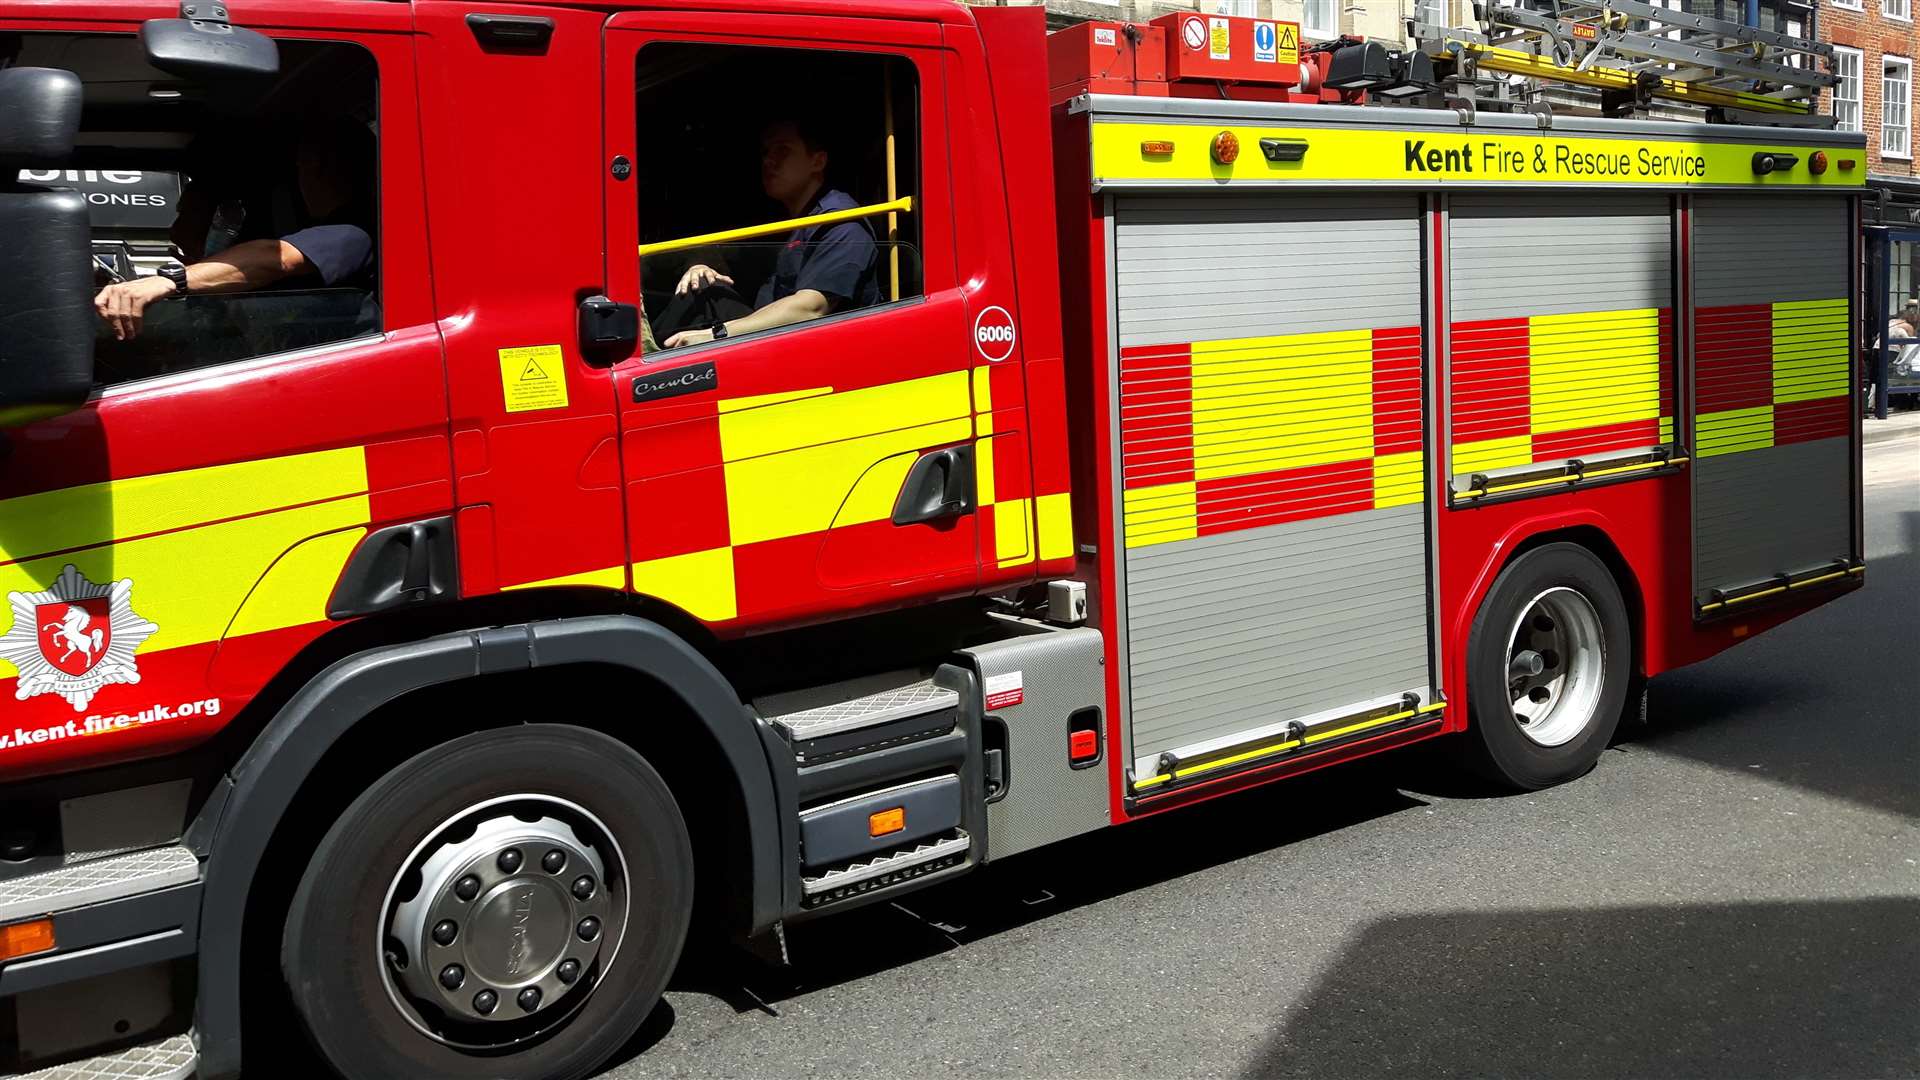 Firefighters were called to the shed fire